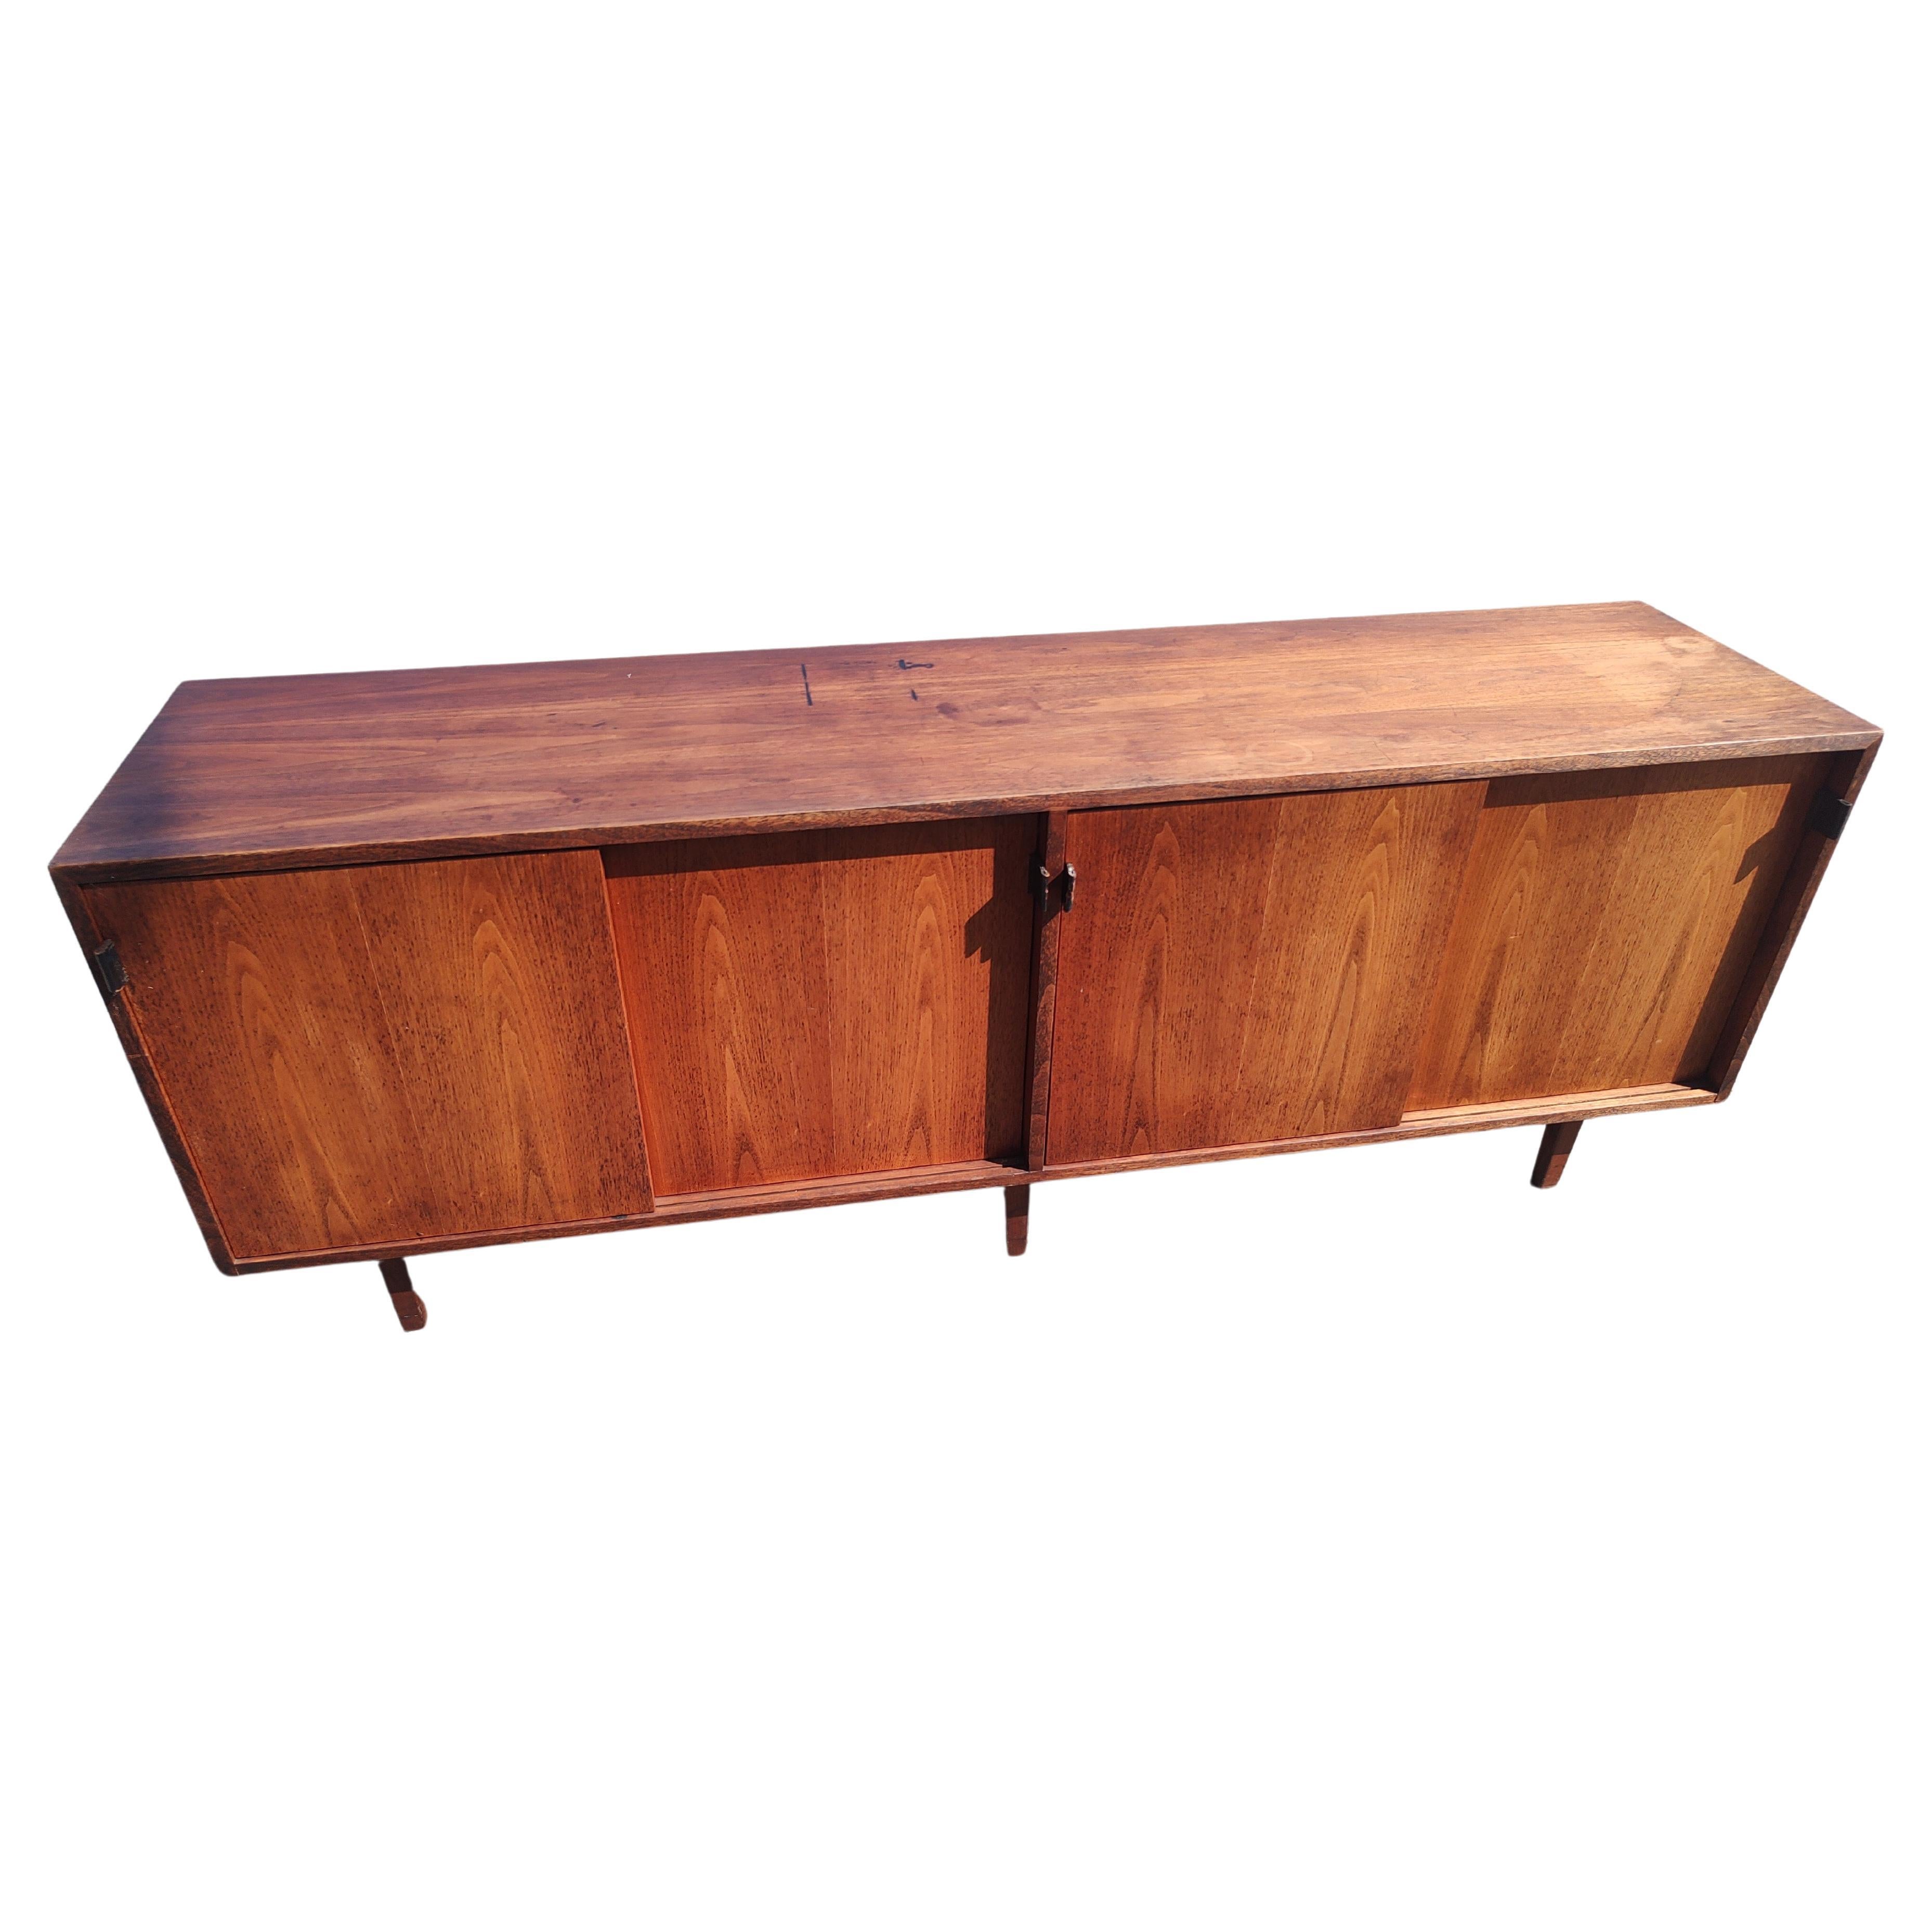 Hand-Crafted Mid Century Modern 4 Door Early Walnut Credenza by Knoll For Sale